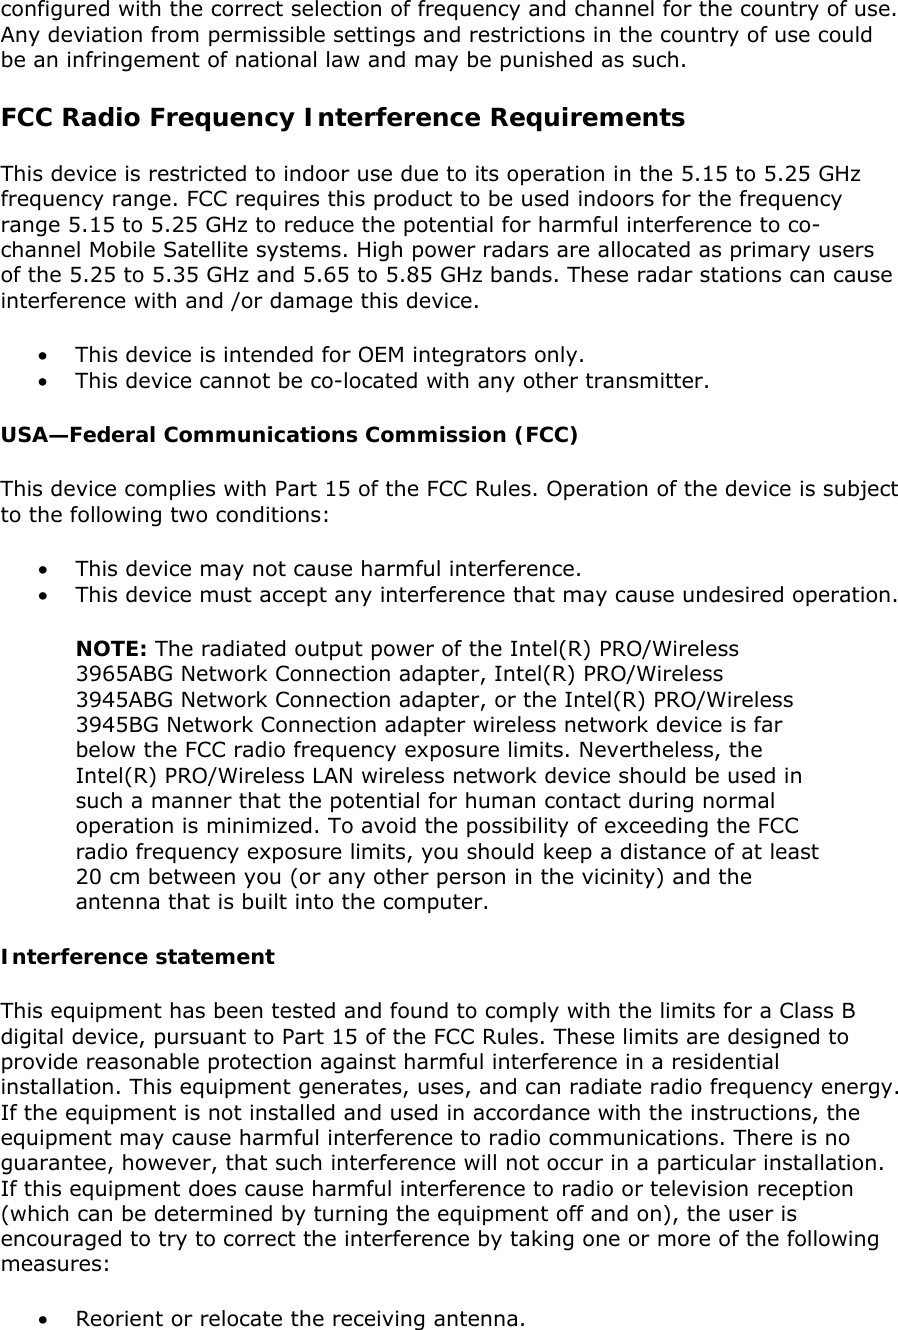 configured with the correct selection of frequency and channel for the country of use. Any deviation from permissible settings and restrictions in the country of use could be an infringement of national law and may be punished as such.  FCC Radio Frequency Interference Requirements  This device is restricted to indoor use due to its operation in the 5.15 to 5.25 GHz frequency range. FCC requires this product to be used indoors for the frequency range 5.15 to 5.25 GHz to reduce the potential for harmful interference to co-channel Mobile Satellite systems. High power radars are allocated as primary users of the 5.25 to 5.35 GHz and 5.65 to 5.85 GHz bands. These radar stations can cause interference with and /or damage this device.  • This device is intended for OEM integrators only. • This device cannot be co-located with any other transmitter.  USA—Federal Communications Commission (FCC) This device complies with Part 15 of the FCC Rules. Operation of the device is subject to the following two conditions:  • This device may not cause harmful interference.  • This device must accept any interference that may cause undesired operation. NOTE: The radiated output power of the Intel(R) PRO/Wireless 3965ABG Network Connection adapter, Intel(R) PRO/Wireless 3945ABG Network Connection adapter, or the Intel(R) PRO/Wireless 3945BG Network Connection adapter wireless network device is far below the FCC radio frequency exposure limits. Nevertheless, the Intel(R) PRO/Wireless LAN wireless network device should be used in such a manner that the potential for human contact during normal operation is minimized. To avoid the possibility of exceeding the FCC radio frequency exposure limits, you should keep a distance of at least 20 cm between you (or any other person in the vicinity) and the antenna that is built into the computer.  Interference statement This equipment has been tested and found to comply with the limits for a Class B digital device, pursuant to Part 15 of the FCC Rules. These limits are designed to provide reasonable protection against harmful interference in a residential installation. This equipment generates, uses, and can radiate radio frequency energy. If the equipment is not installed and used in accordance with the instructions, the equipment may cause harmful interference to radio communications. There is no guarantee, however, that such interference will not occur in a particular installation. If this equipment does cause harmful interference to radio or television reception (which can be determined by turning the equipment off and on), the user is encouraged to try to correct the interference by taking one or more of the following measures:  • Reorient or relocate the receiving antenna.  